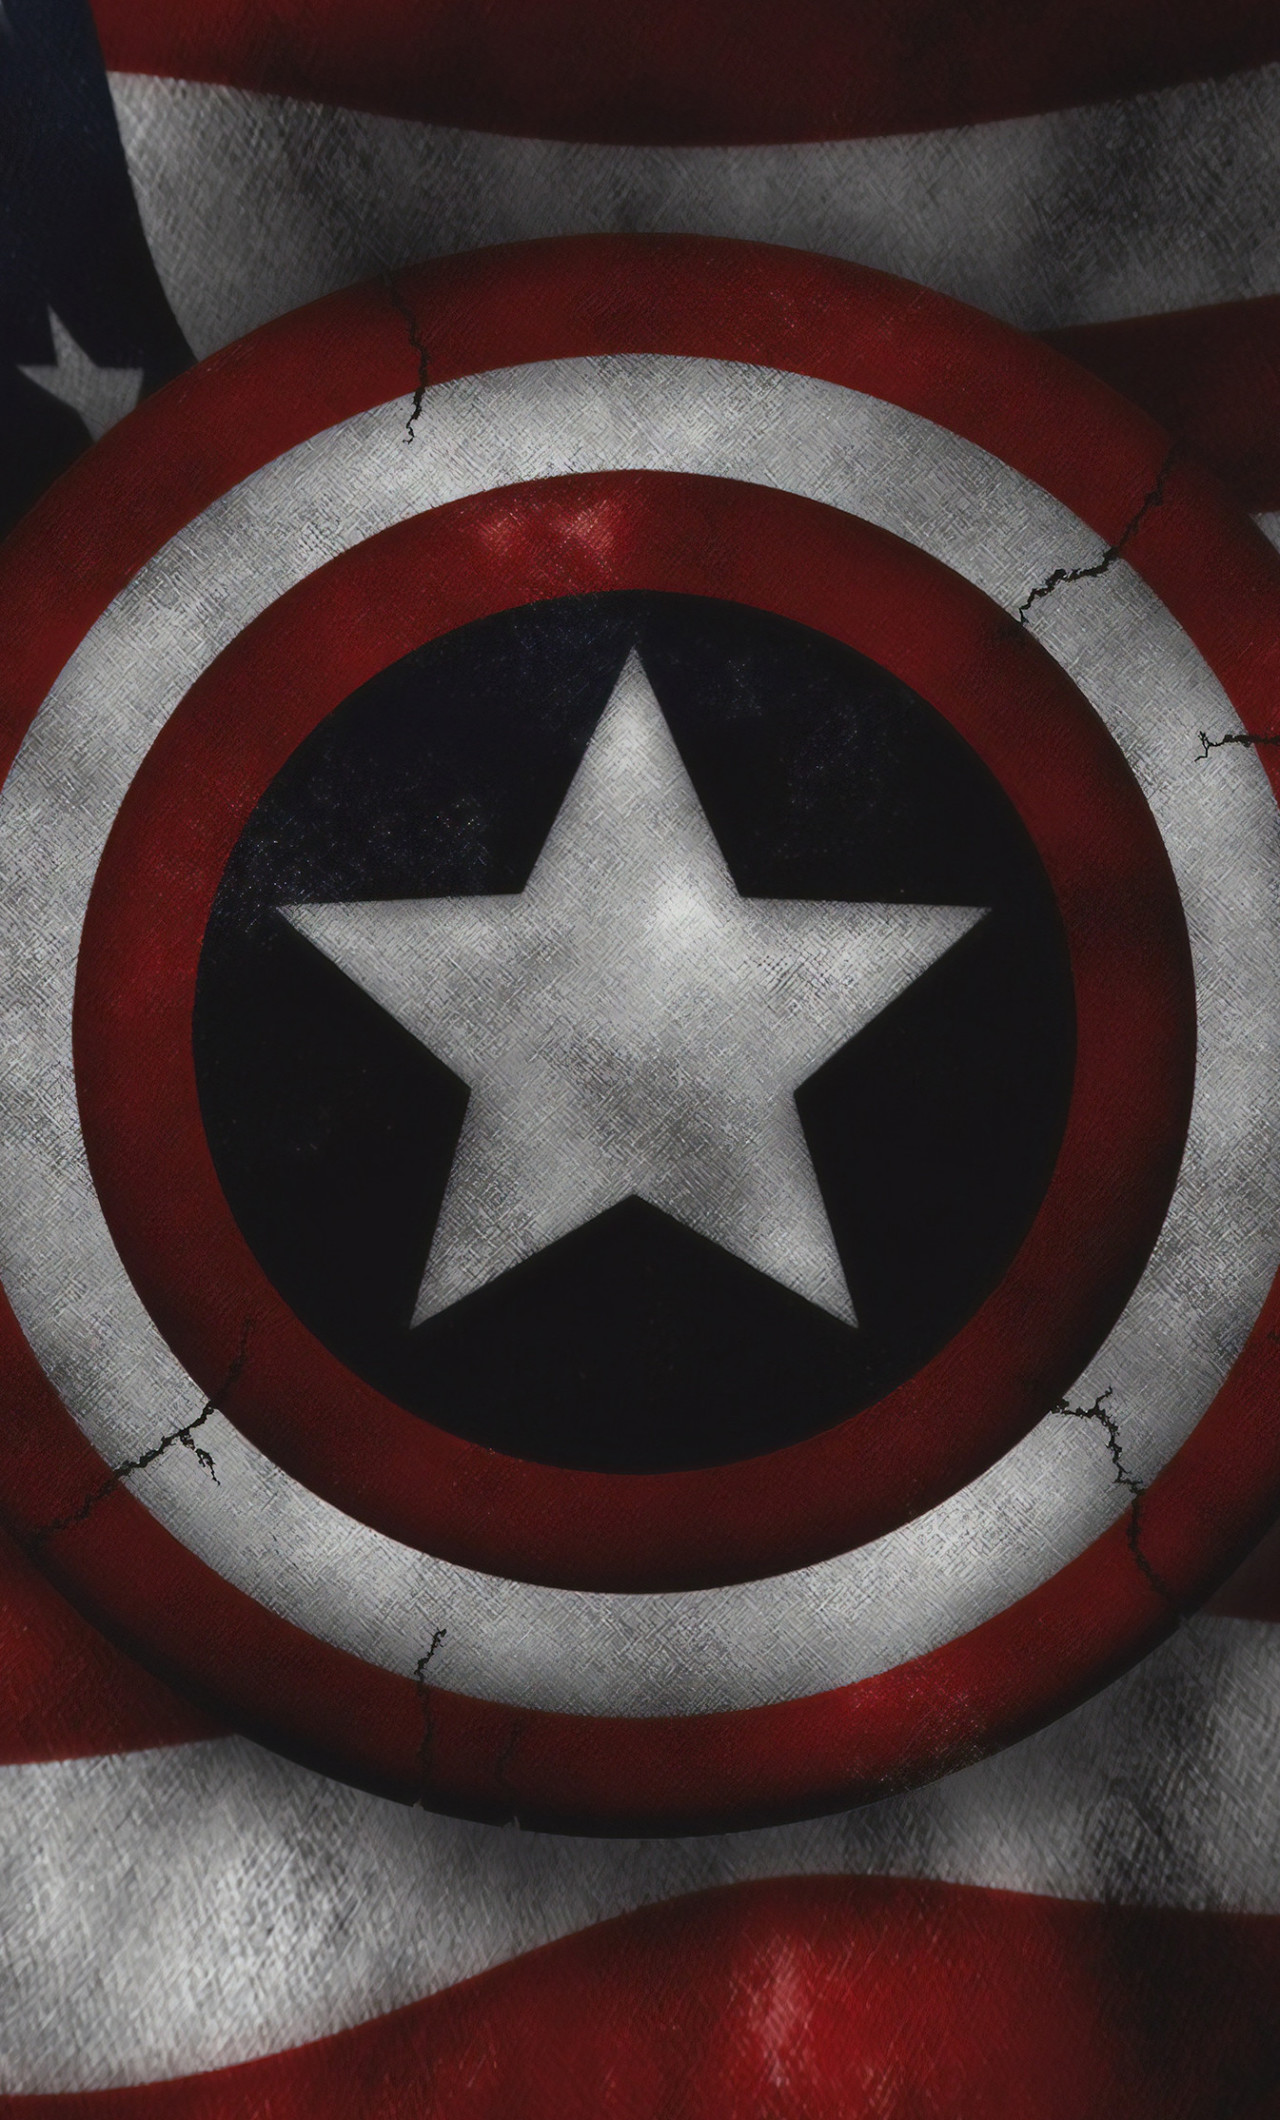 Captain America Among Us Wallpapers